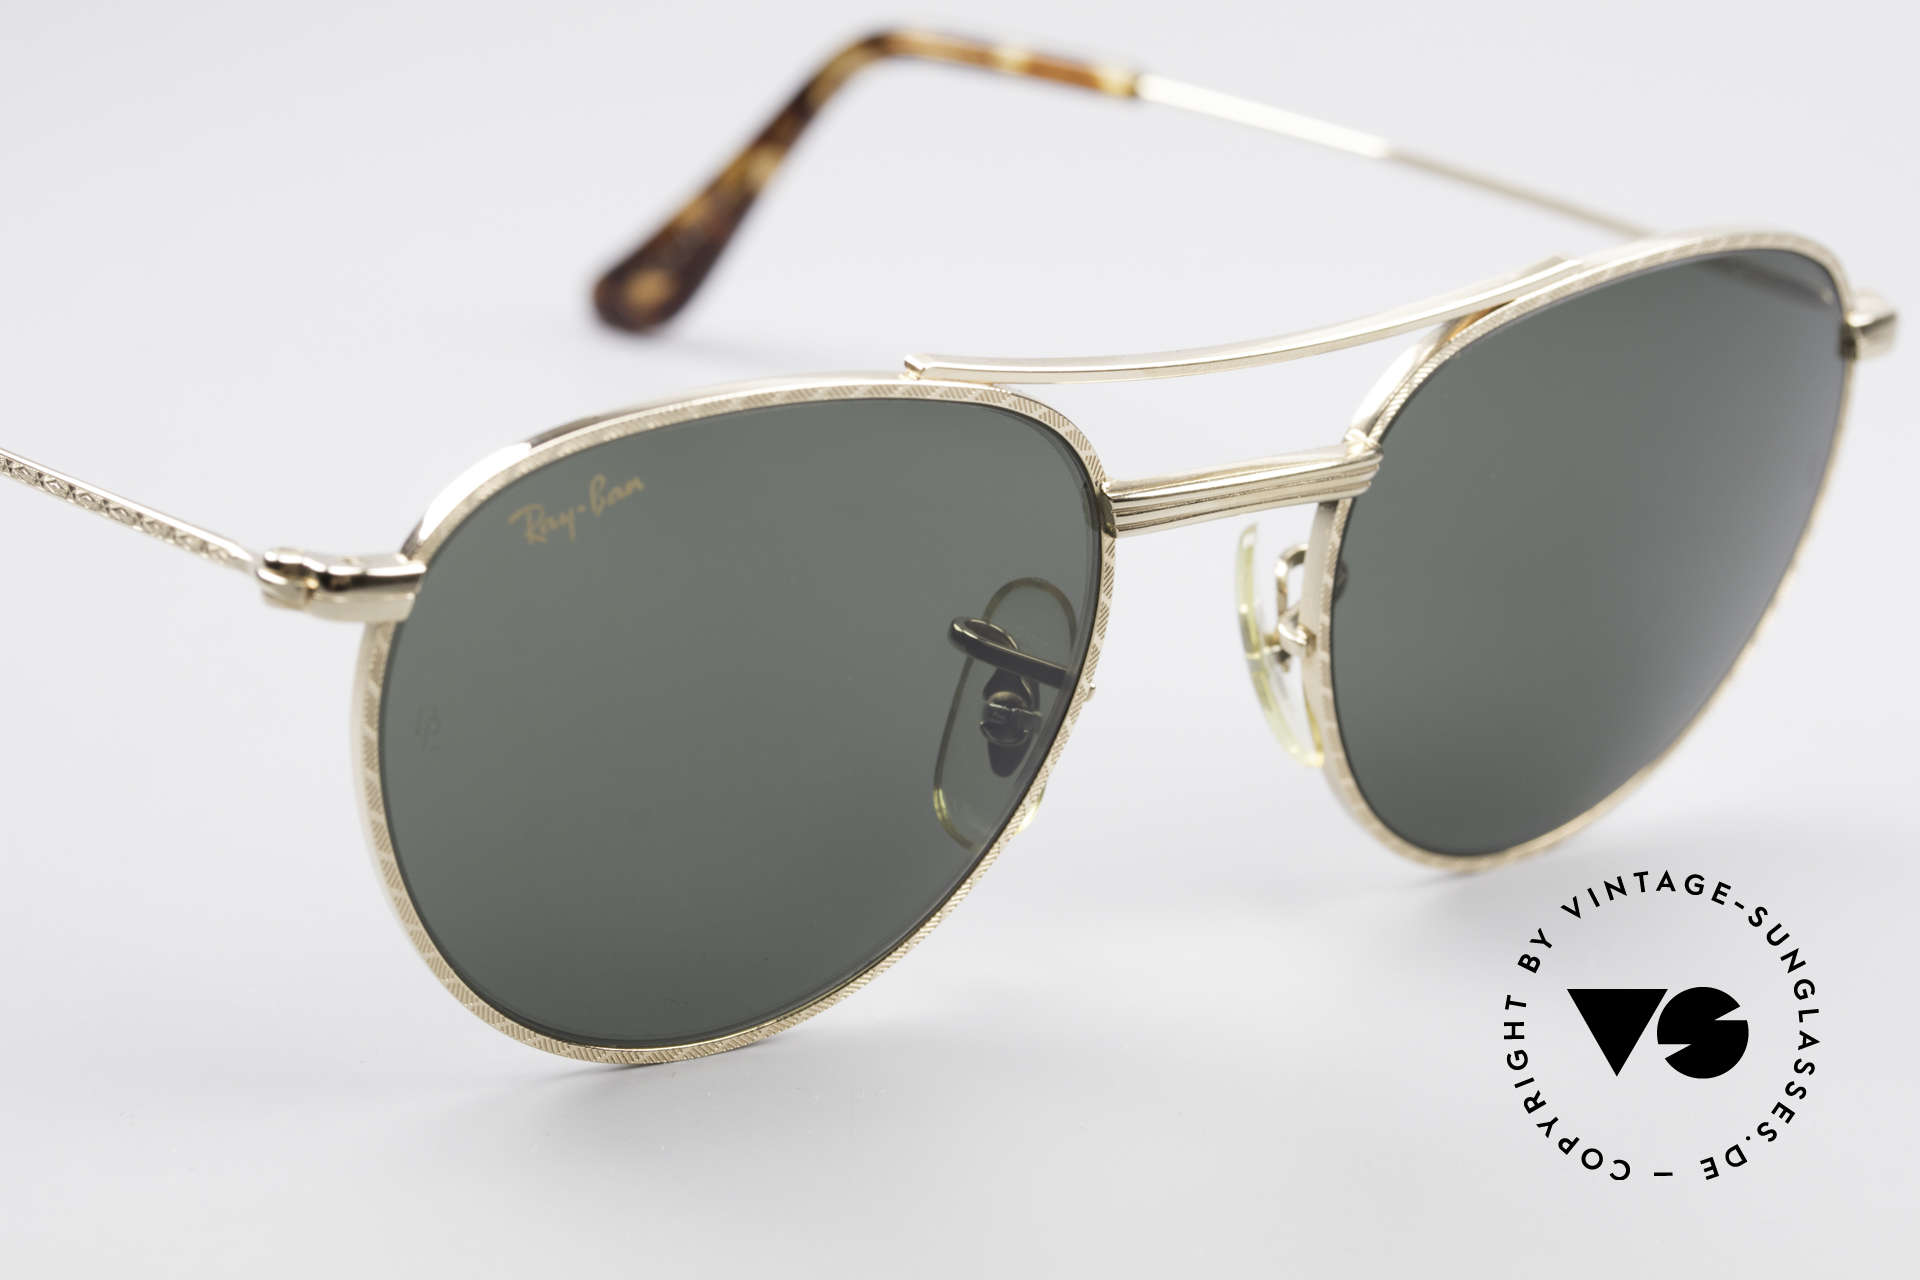 Grine temperament honning Sunglasses Ray Ban 1940's Retro Round Old Ray-Ban USA Bausch&Lomb